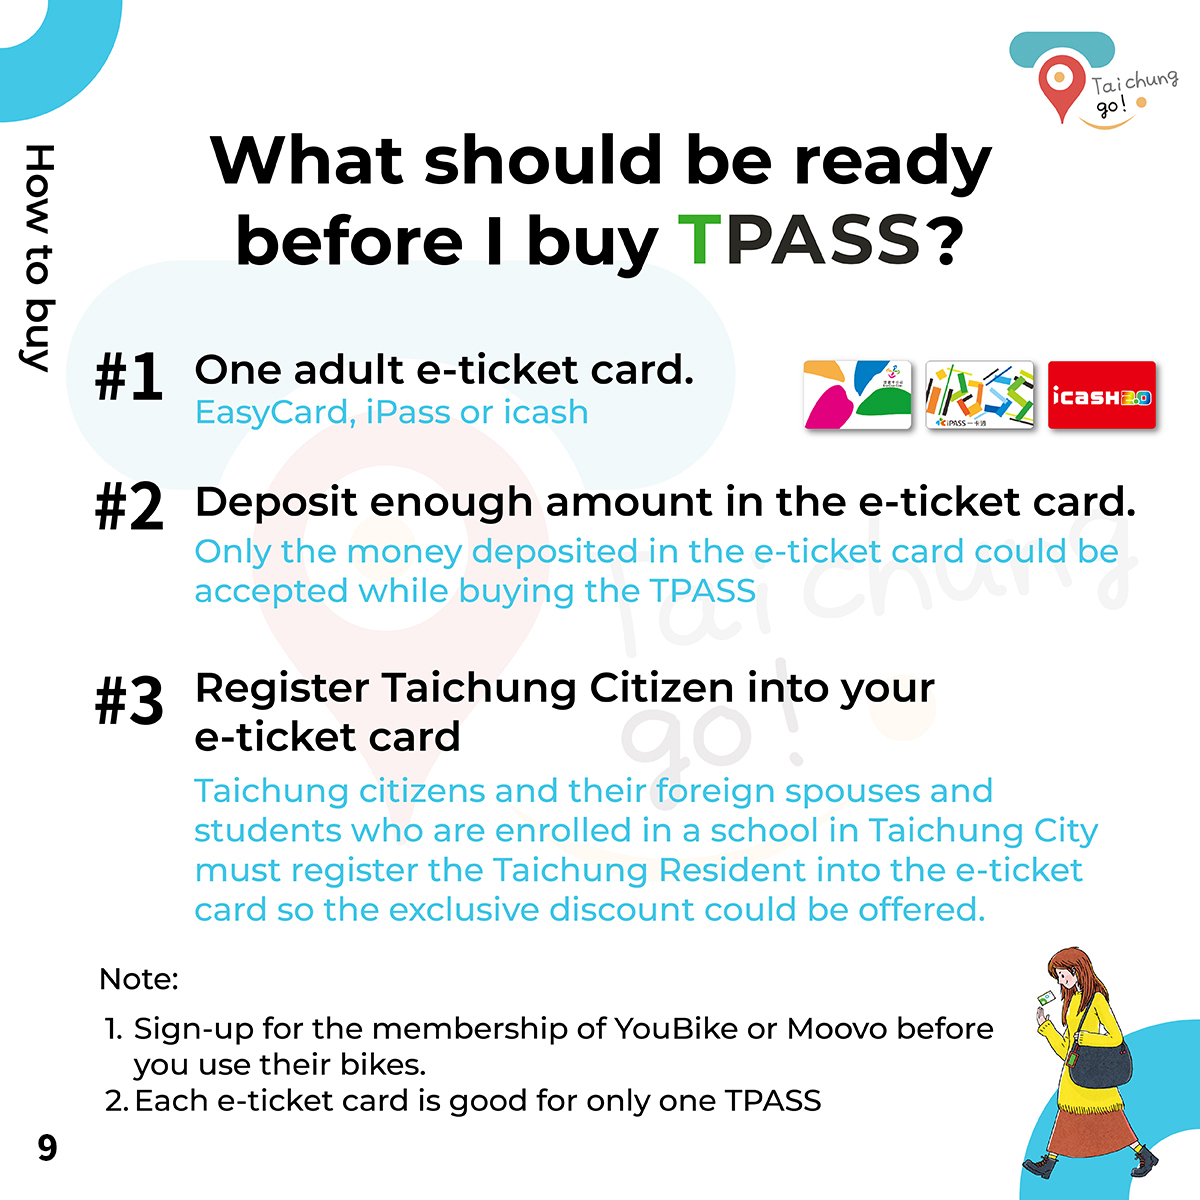 What should be ready before I buy TPASS? 1.One adult e-ticket card 2.Deposit enough amount in your e-ticket card. 3.Register Taichung Citizen into your e-ticket. Note:Each e-ticket card only be one TPASS.